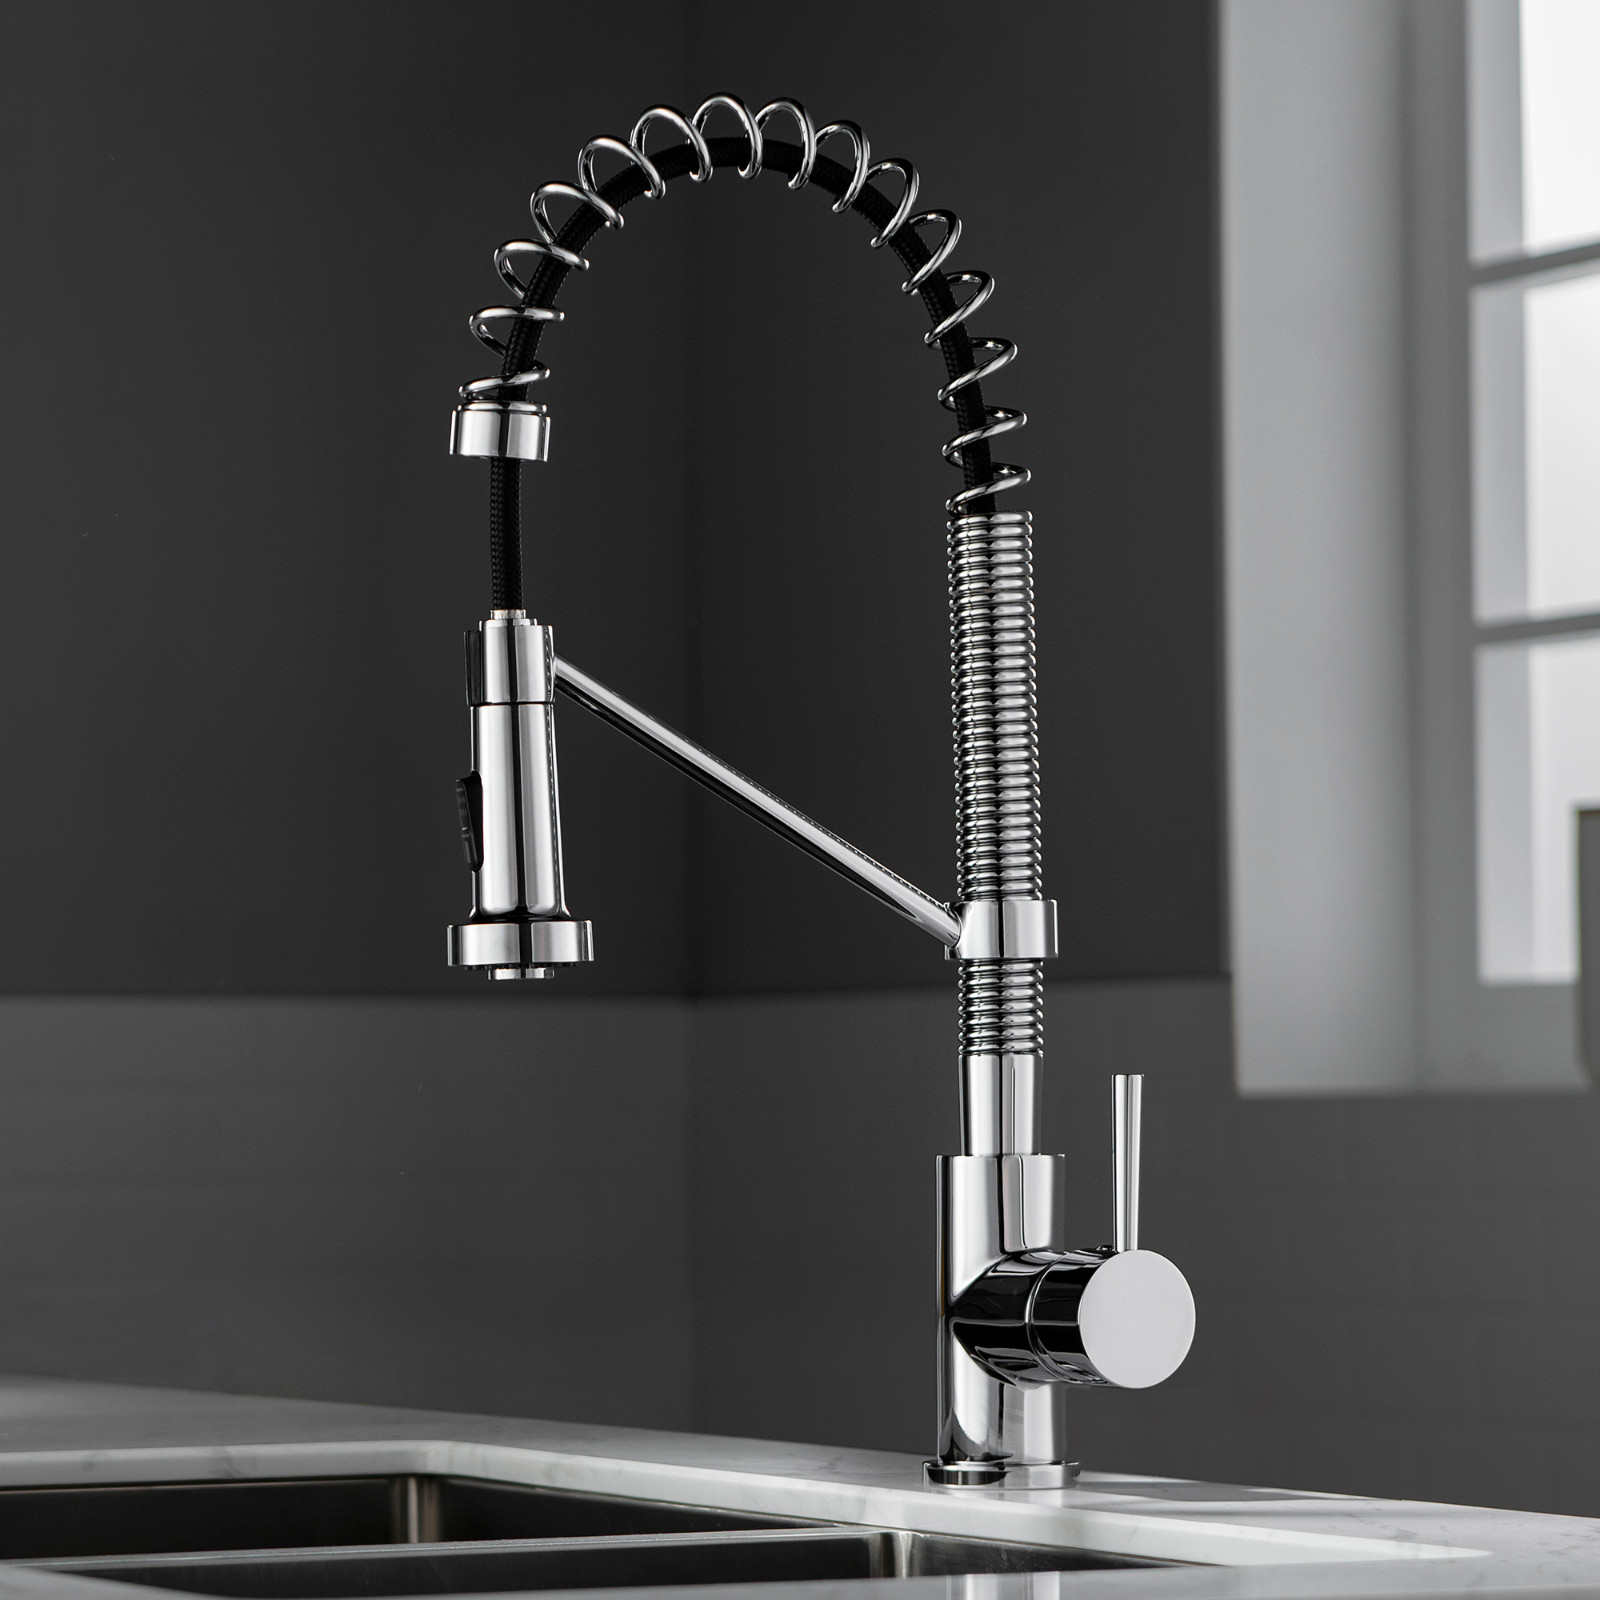  WOODBRIDGE WK010203CH Stainless Steel Single Handle Spring Coil Pre-Rinse Kitchen Faucet with Pull Down Sprayer, Chrome Finish_9456